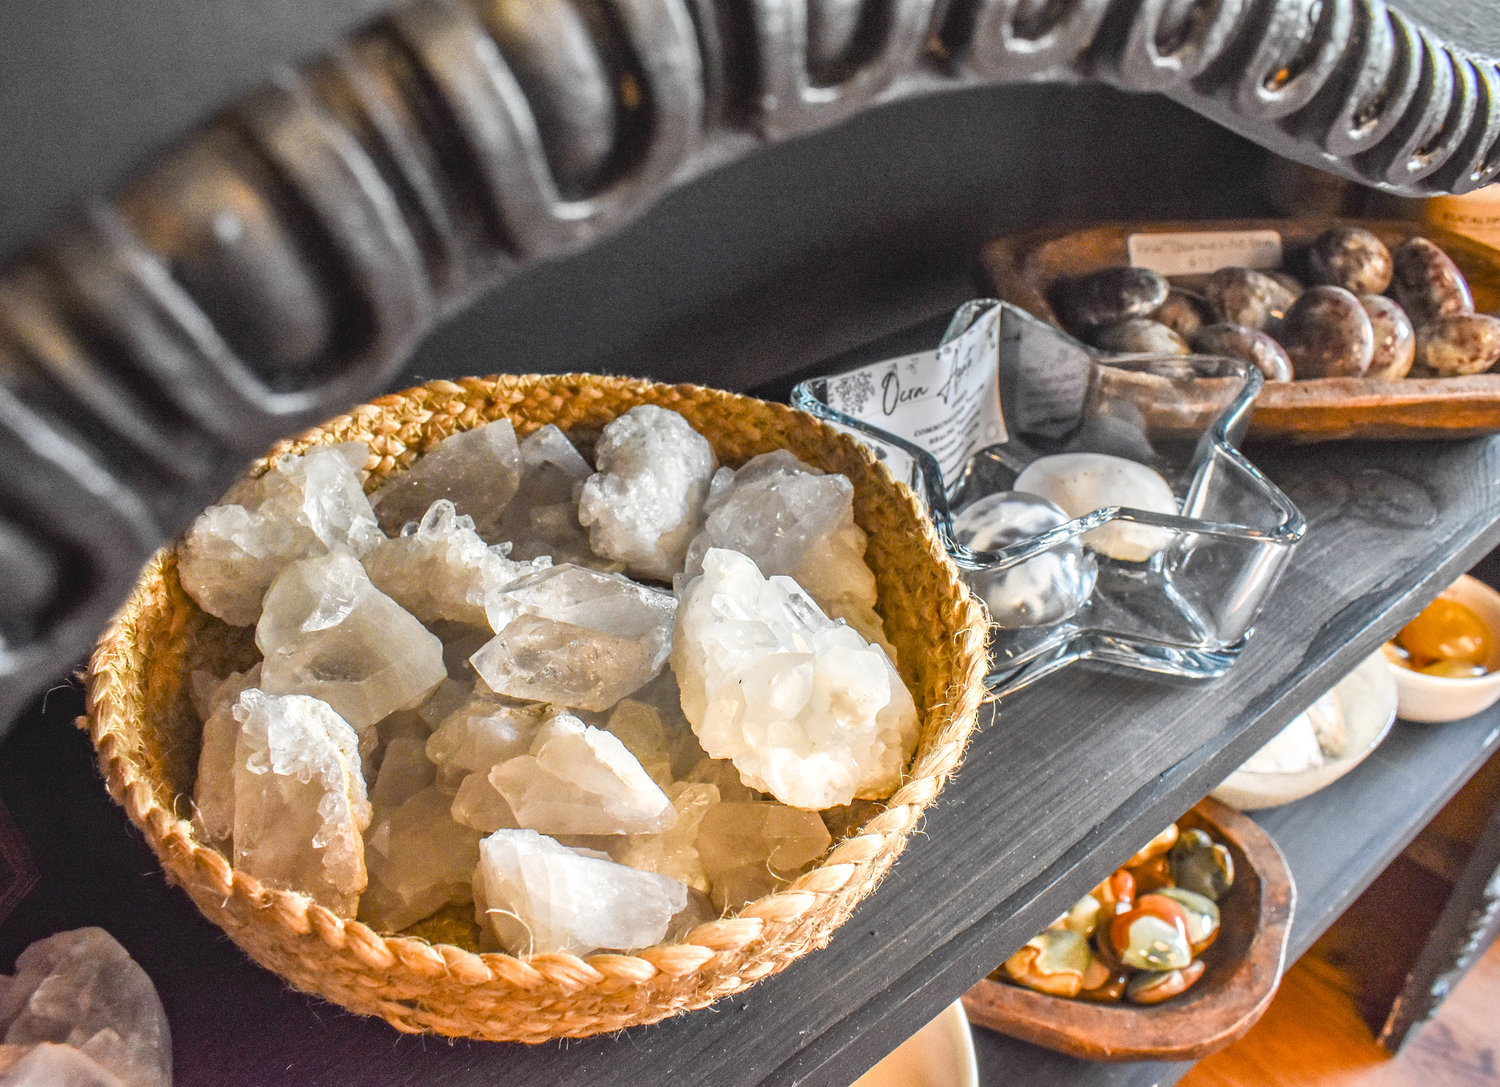 A variety of crystals and rocks can be found at The Magical Muse, 103 North Peterboro St., Canastota.